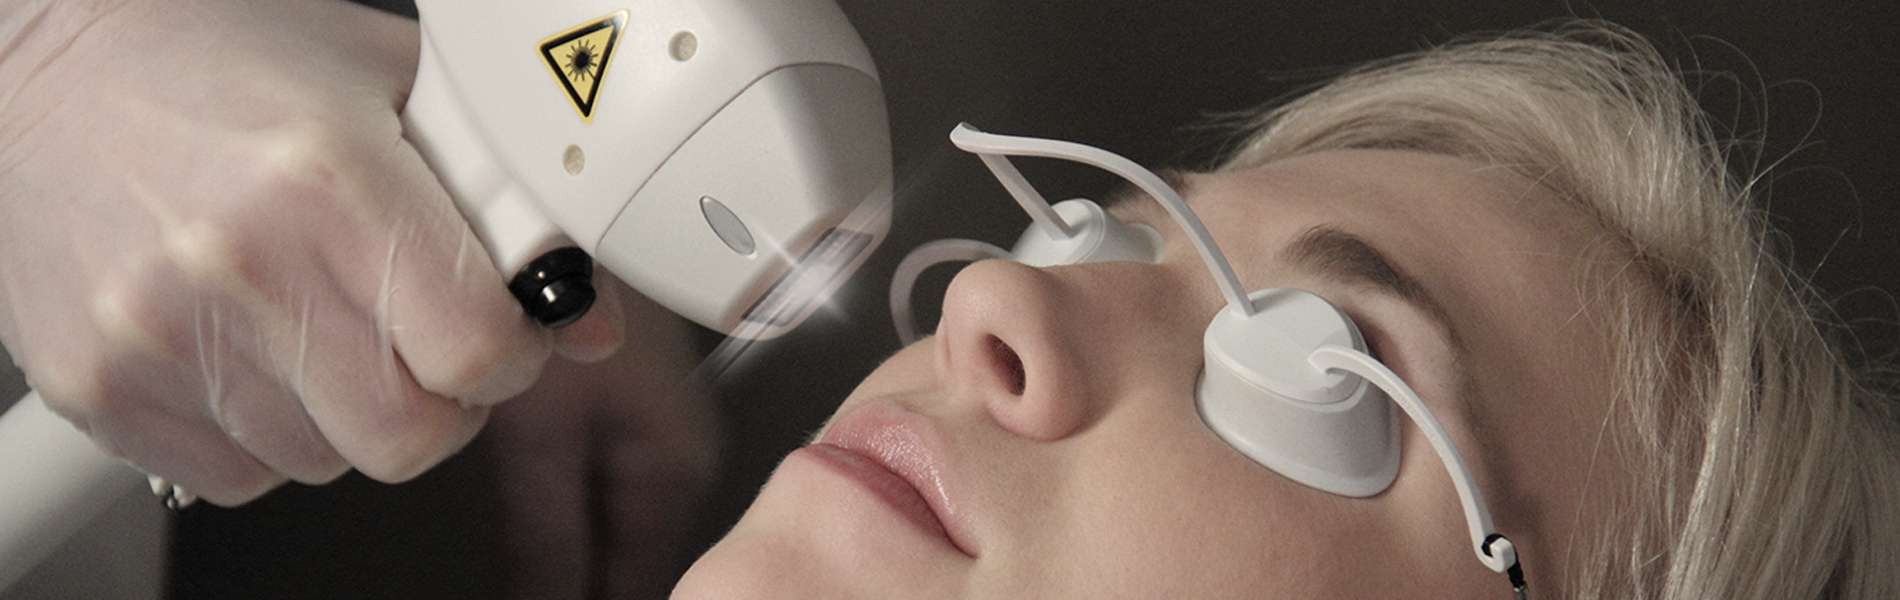 Eyeball protectors for laser surgery on patient face